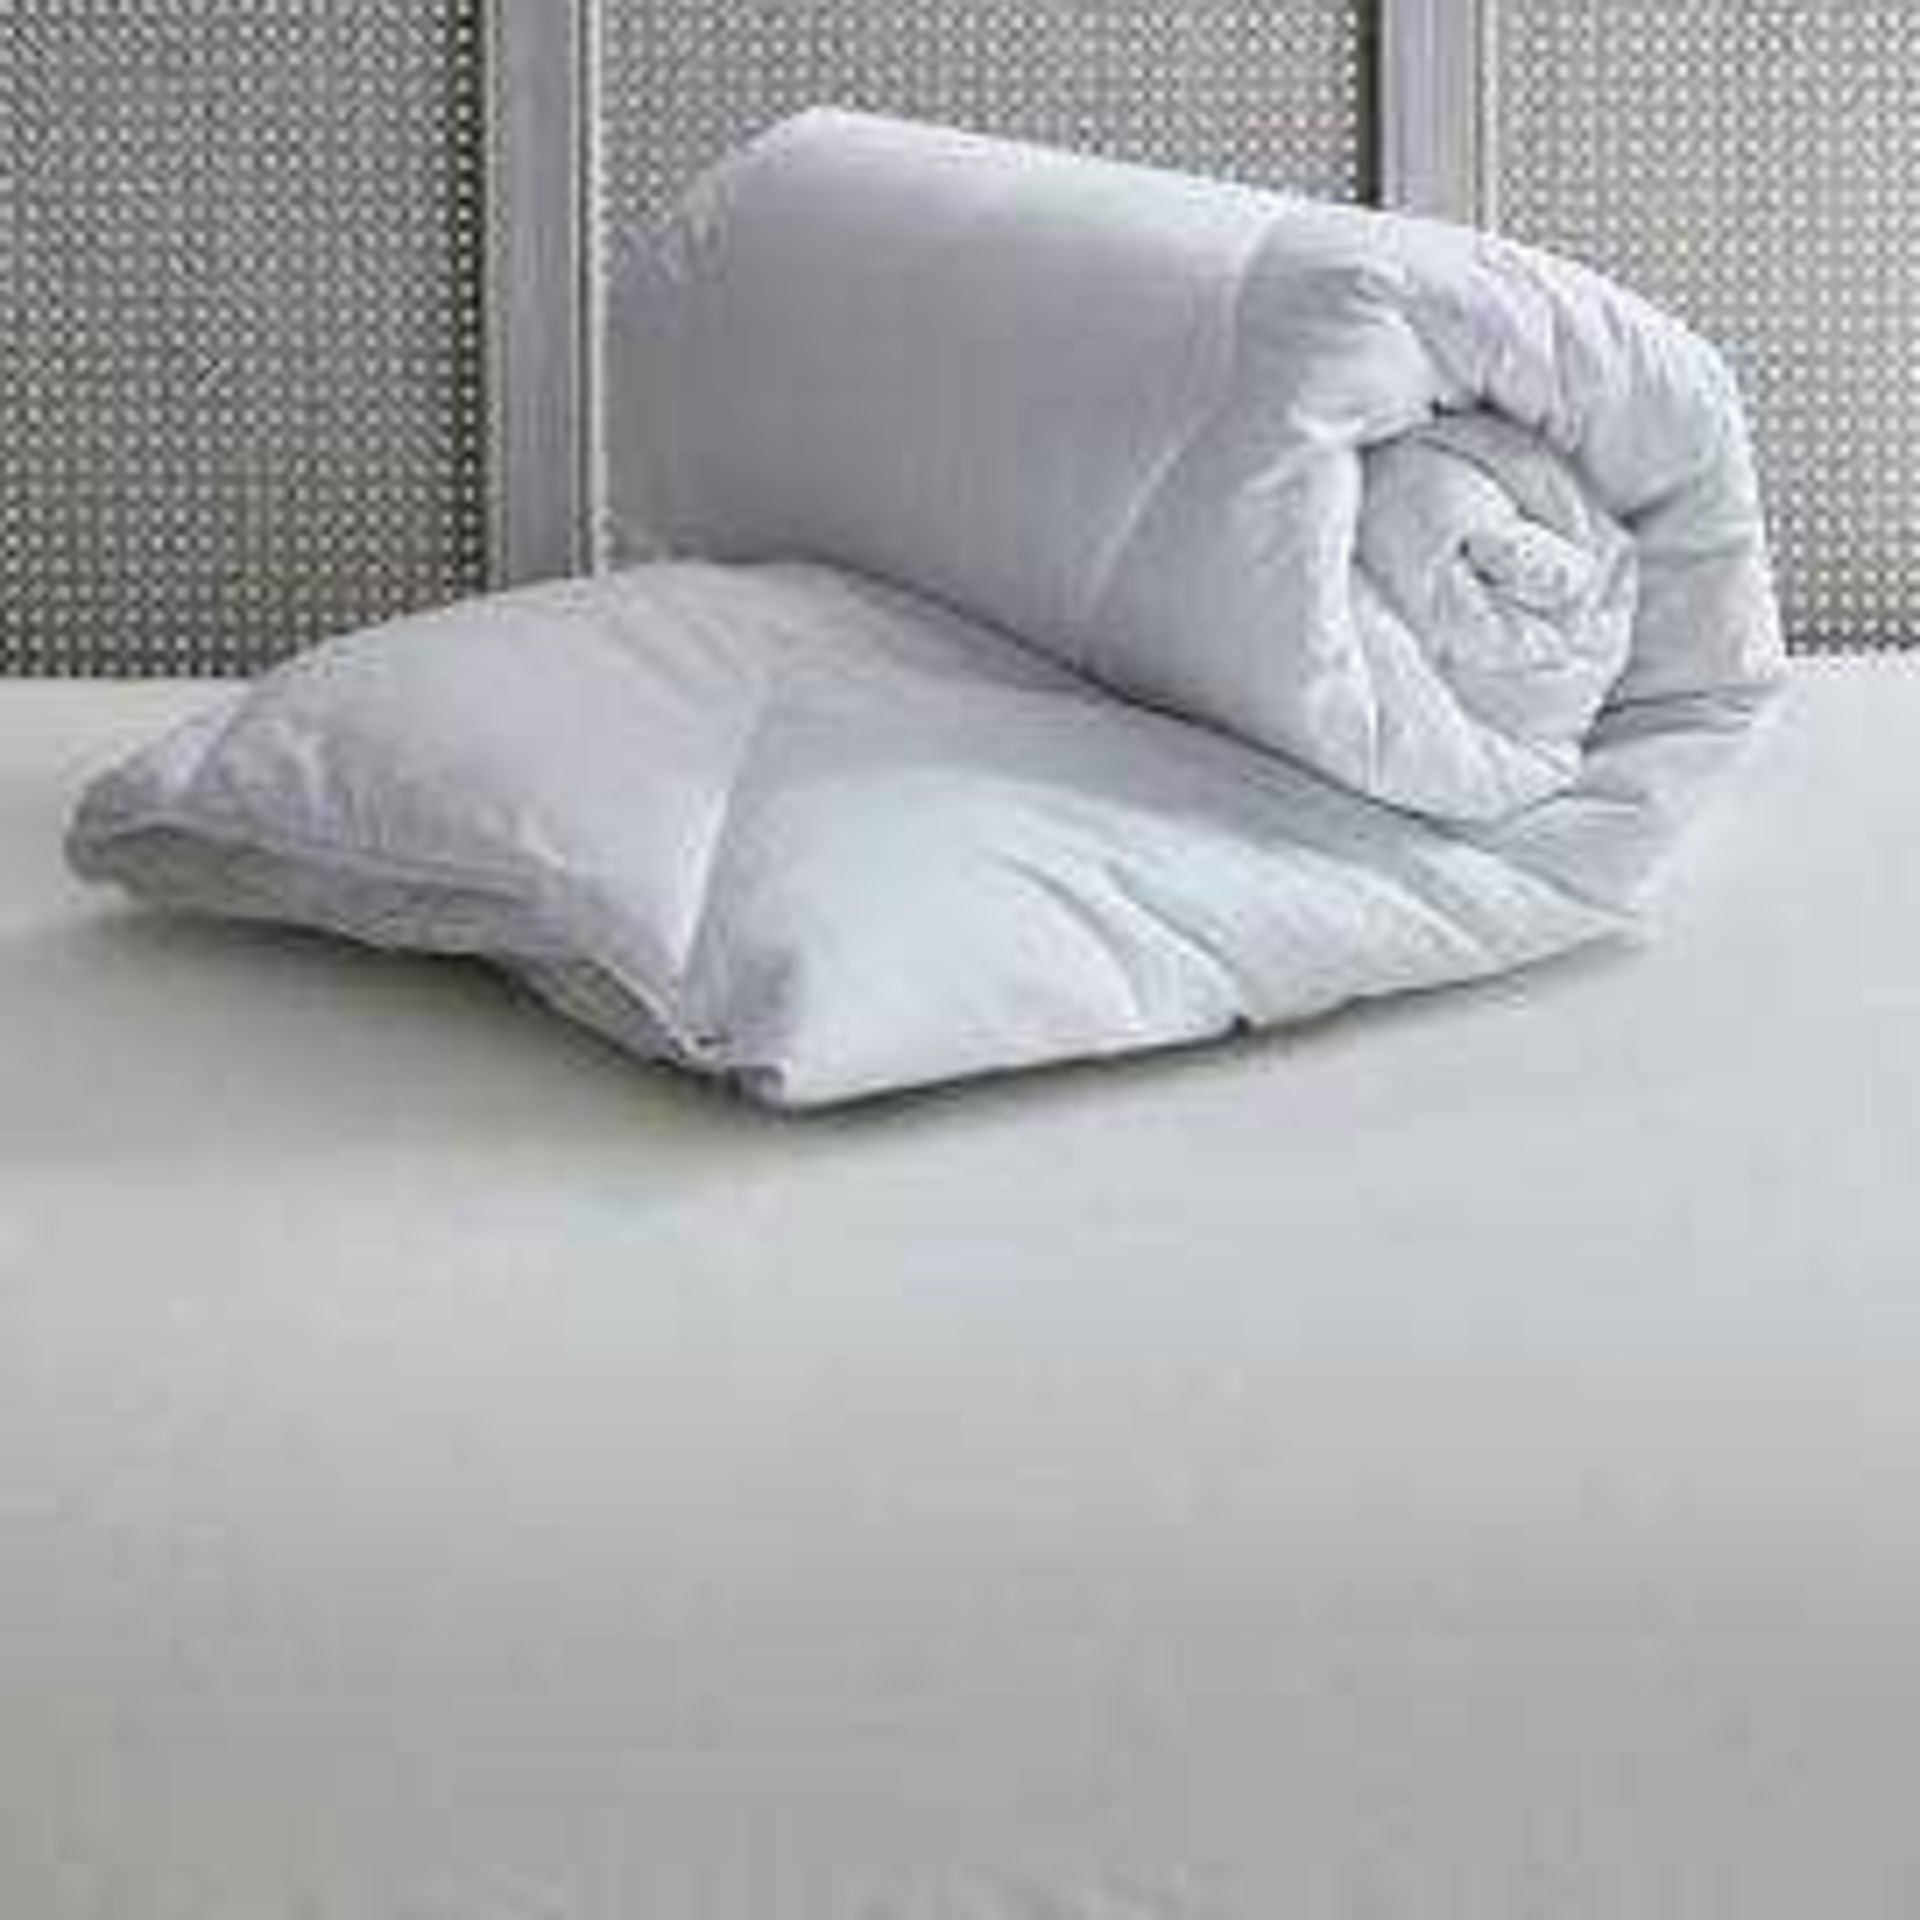 RRP £280 Lot To Contain Nectar Bundle To Include 2X Nectar Memory Foam Pillows, 1X Bagged Nectar K - Image 3 of 3